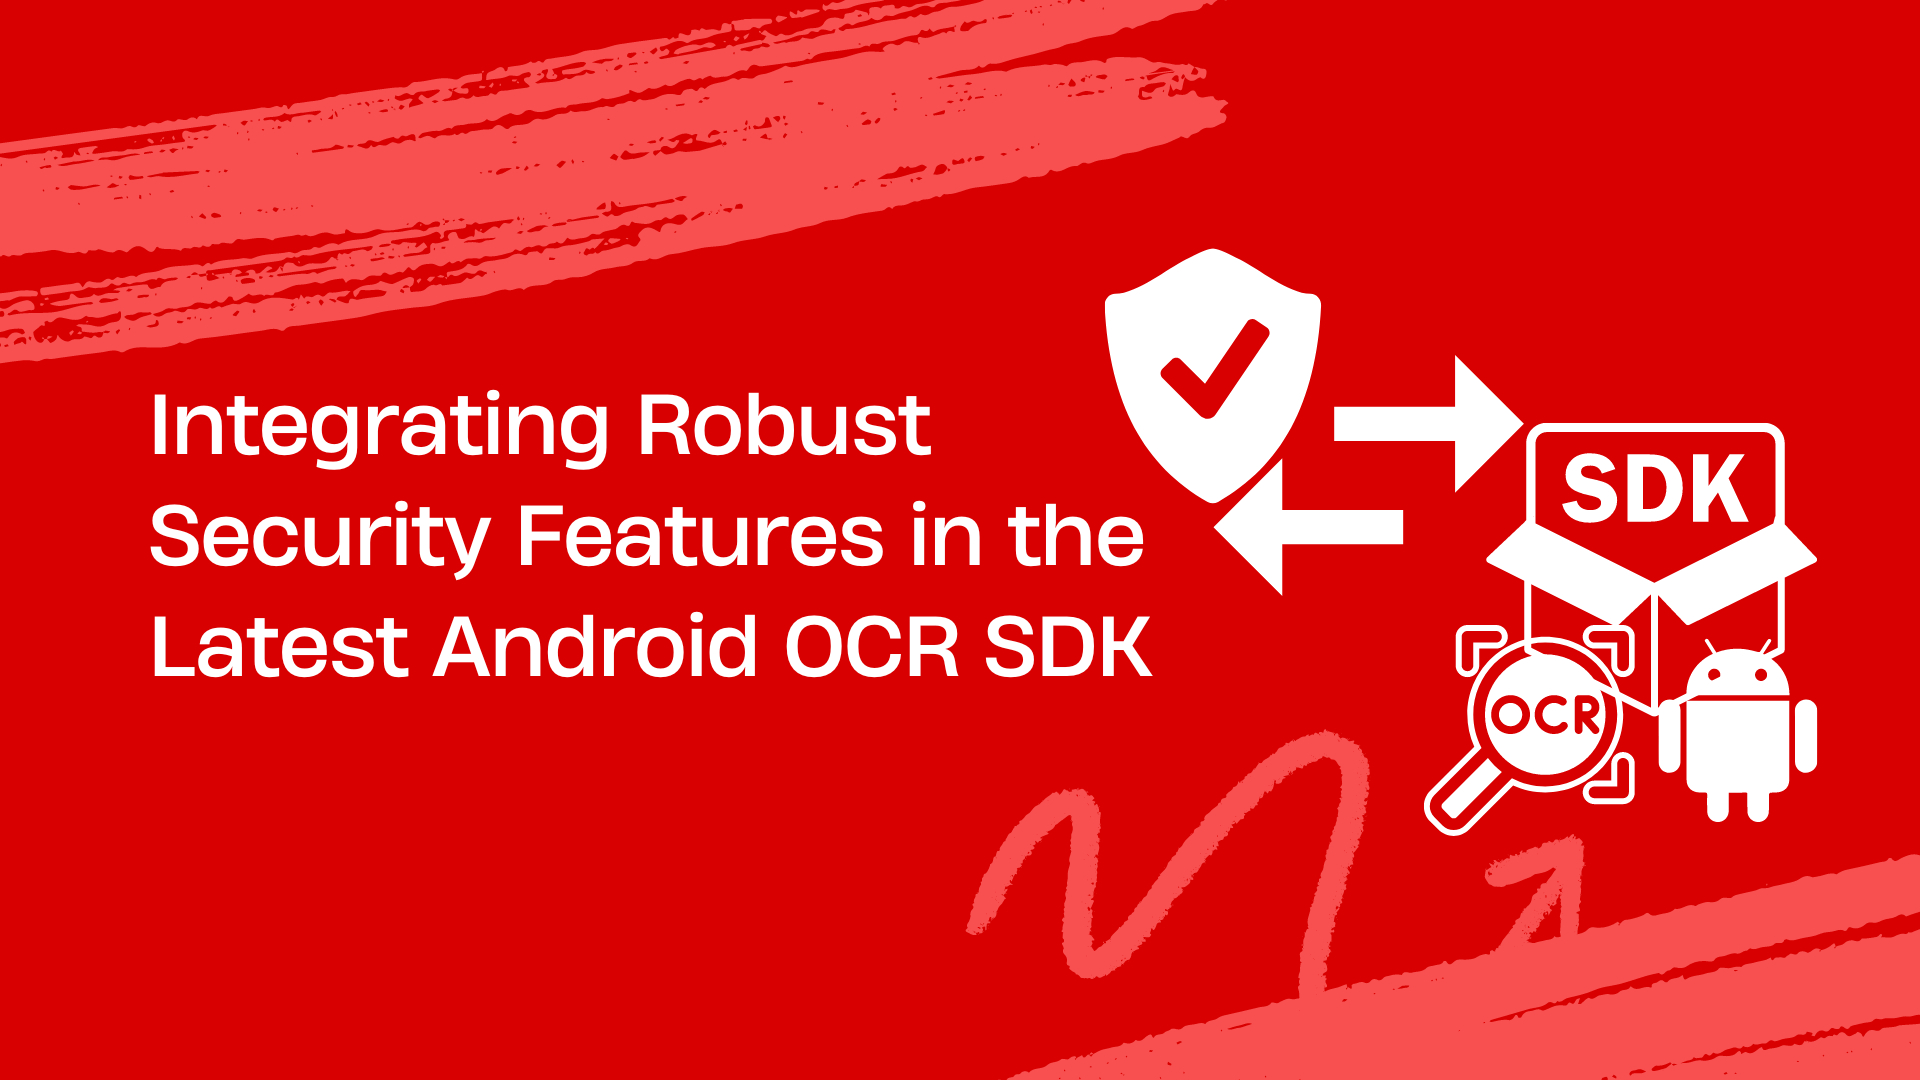 Integrating robust security features in the latest Android OCR SDK